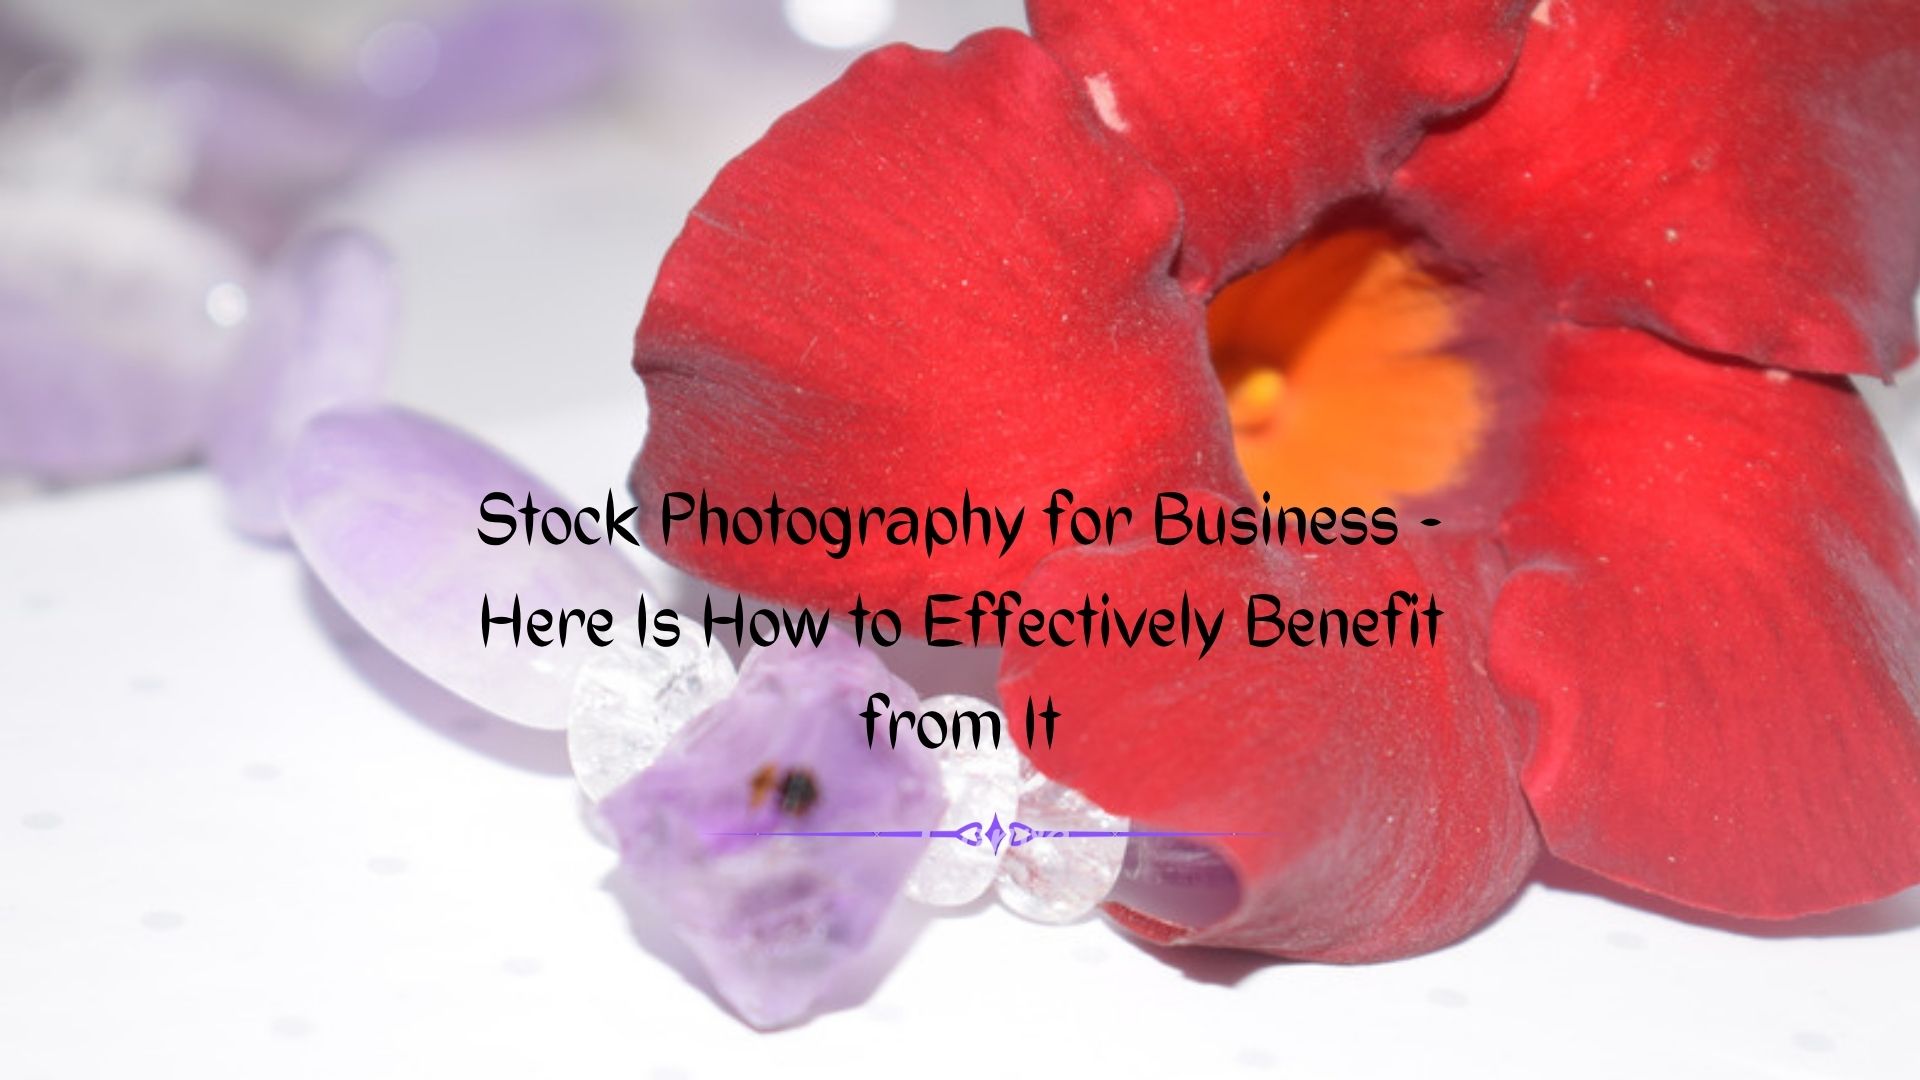 Stock Photography for Business – How to Extract Maximum Benefits from It